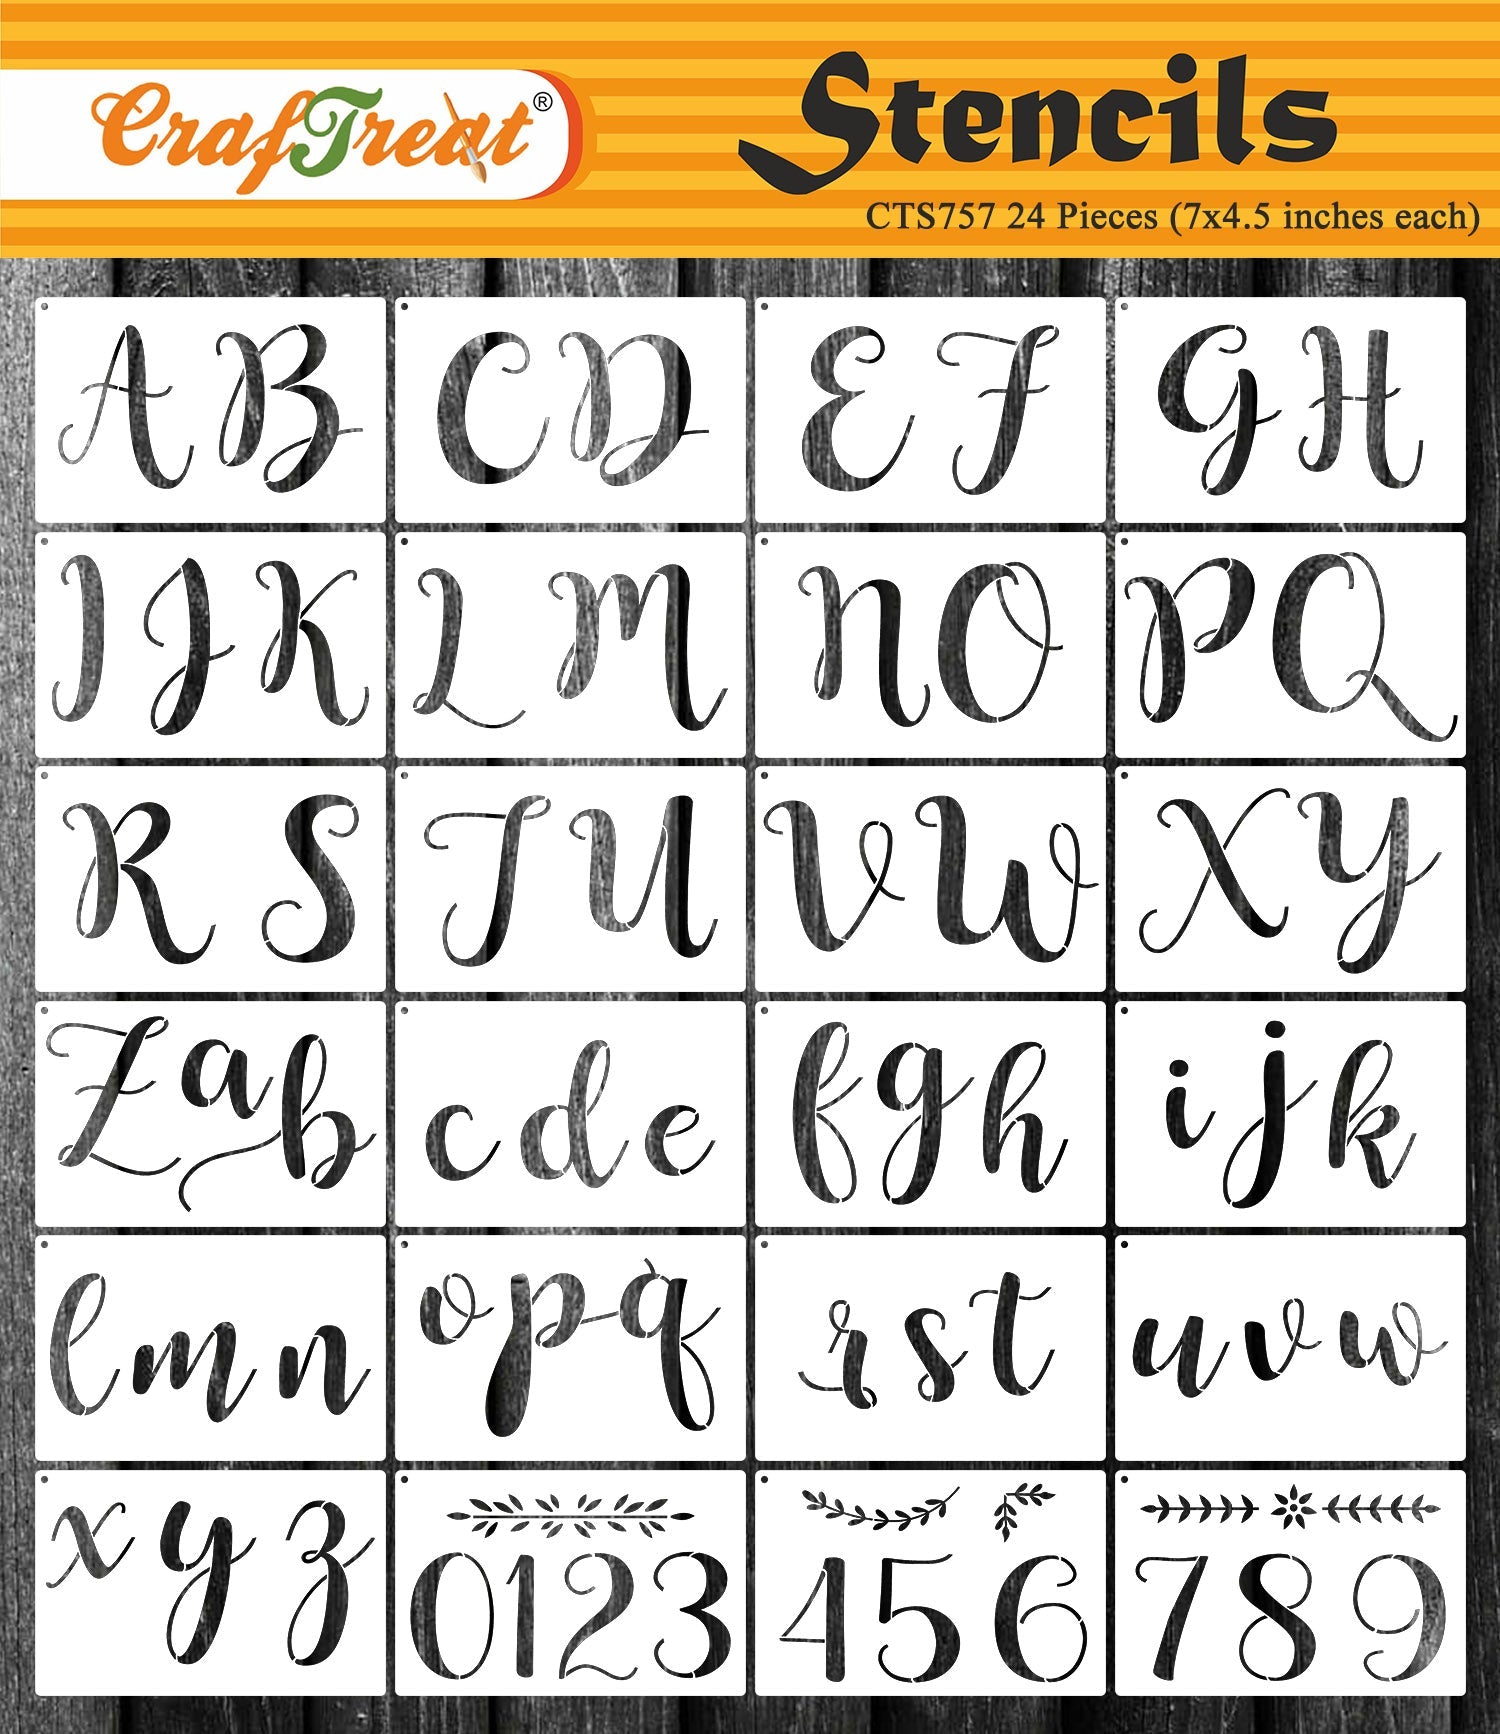 16 Sheets Word Template Chalkboard Stencils Calligraphy Letters